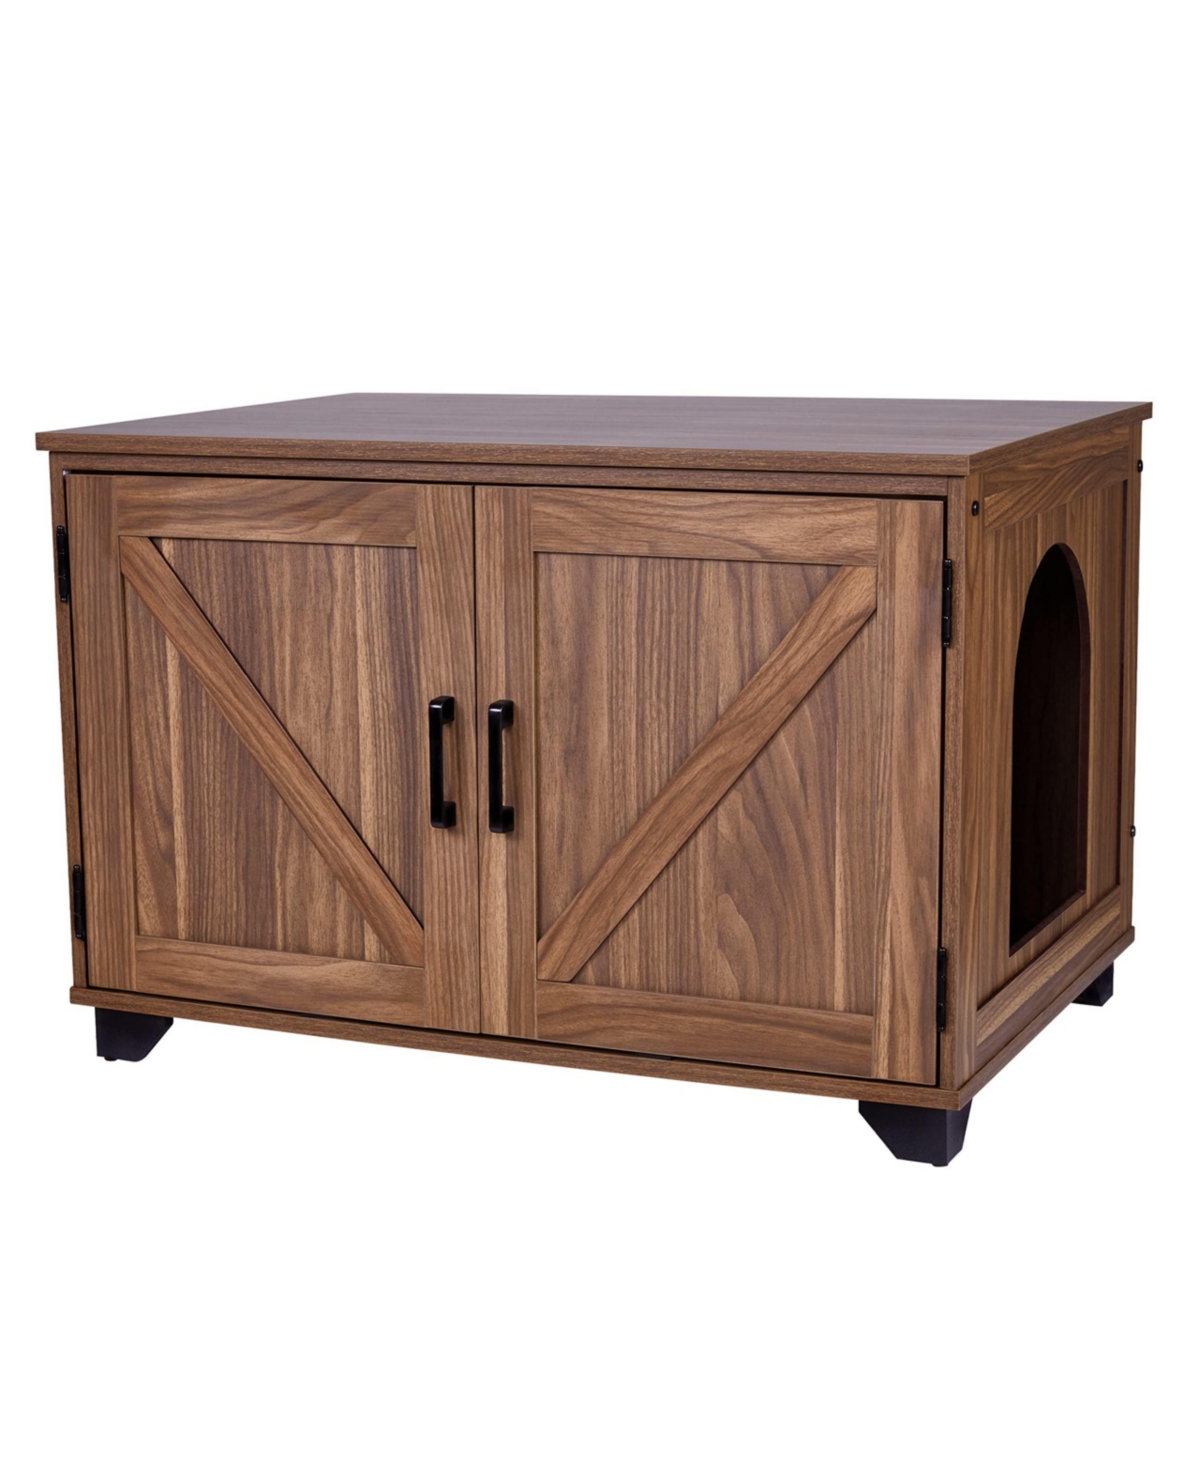 Cat Litter Box Enclosure, Cat Furniture Box House with Table - Wood